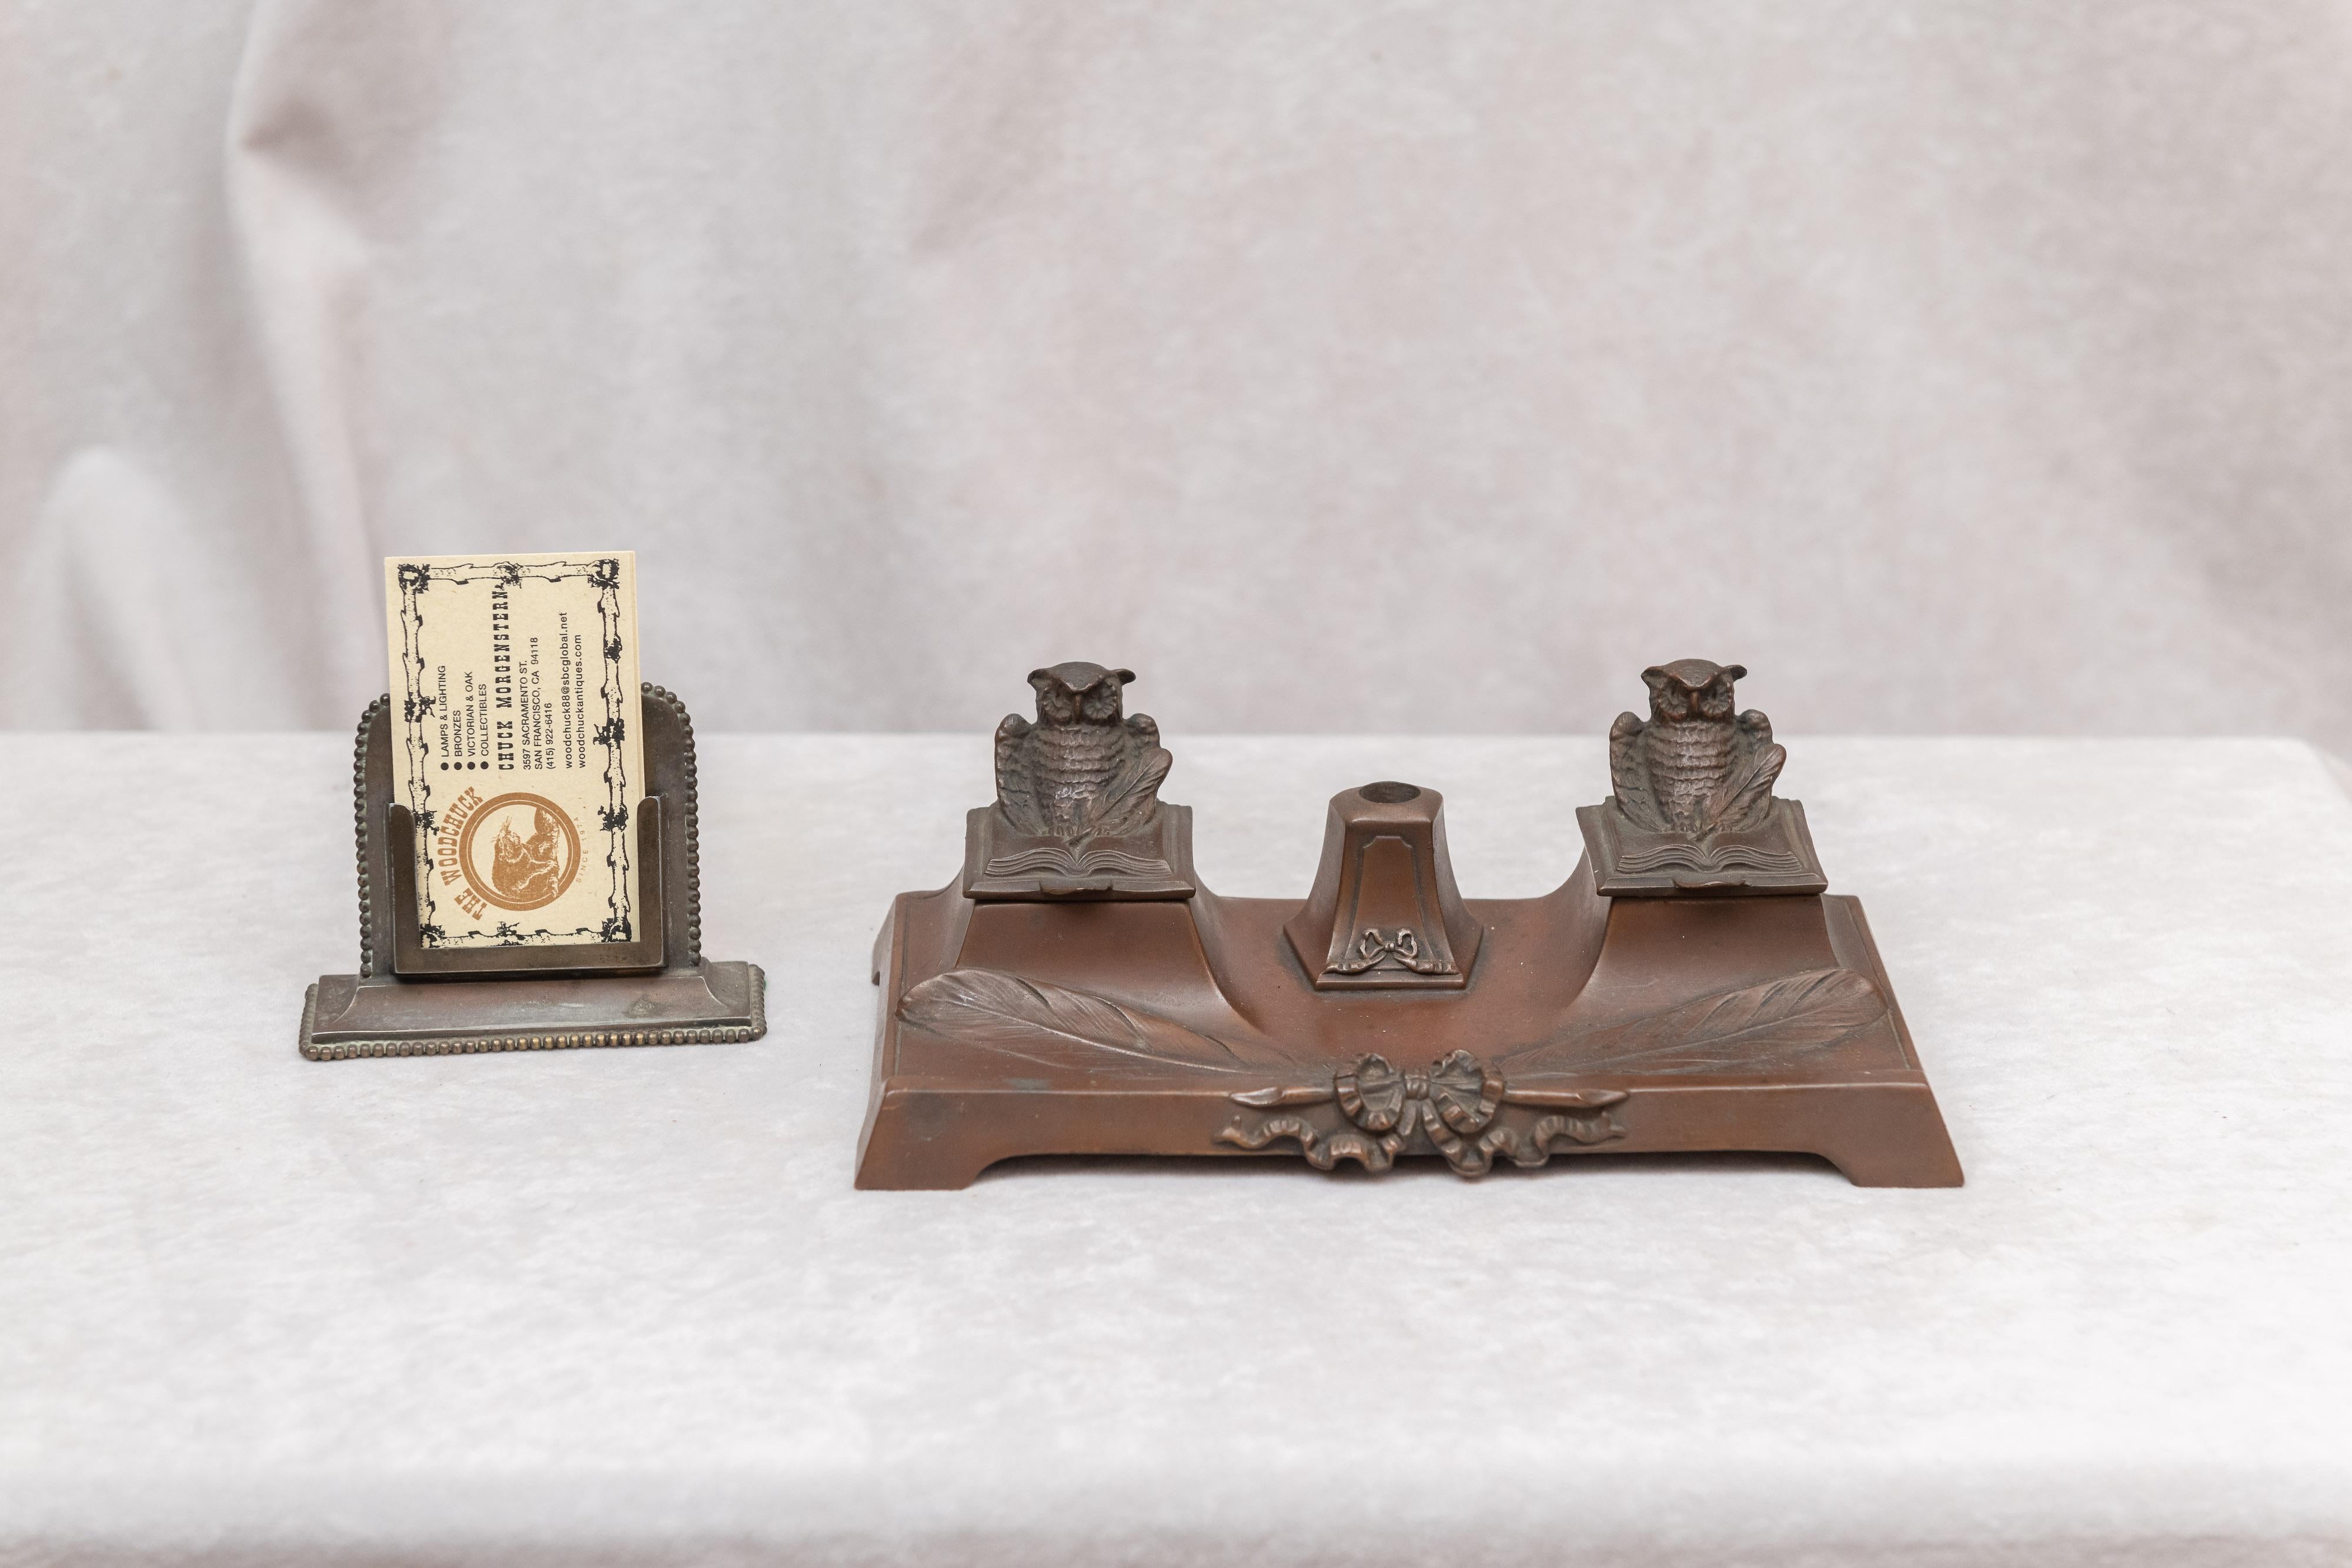 This very cute little inkwell is American and circa 1920. We believe it was made by Jennings Bros. The warm brown patina certainly points to them. The hole in the middle of the owls would be for your pen or pencil. It has been on our own desk for